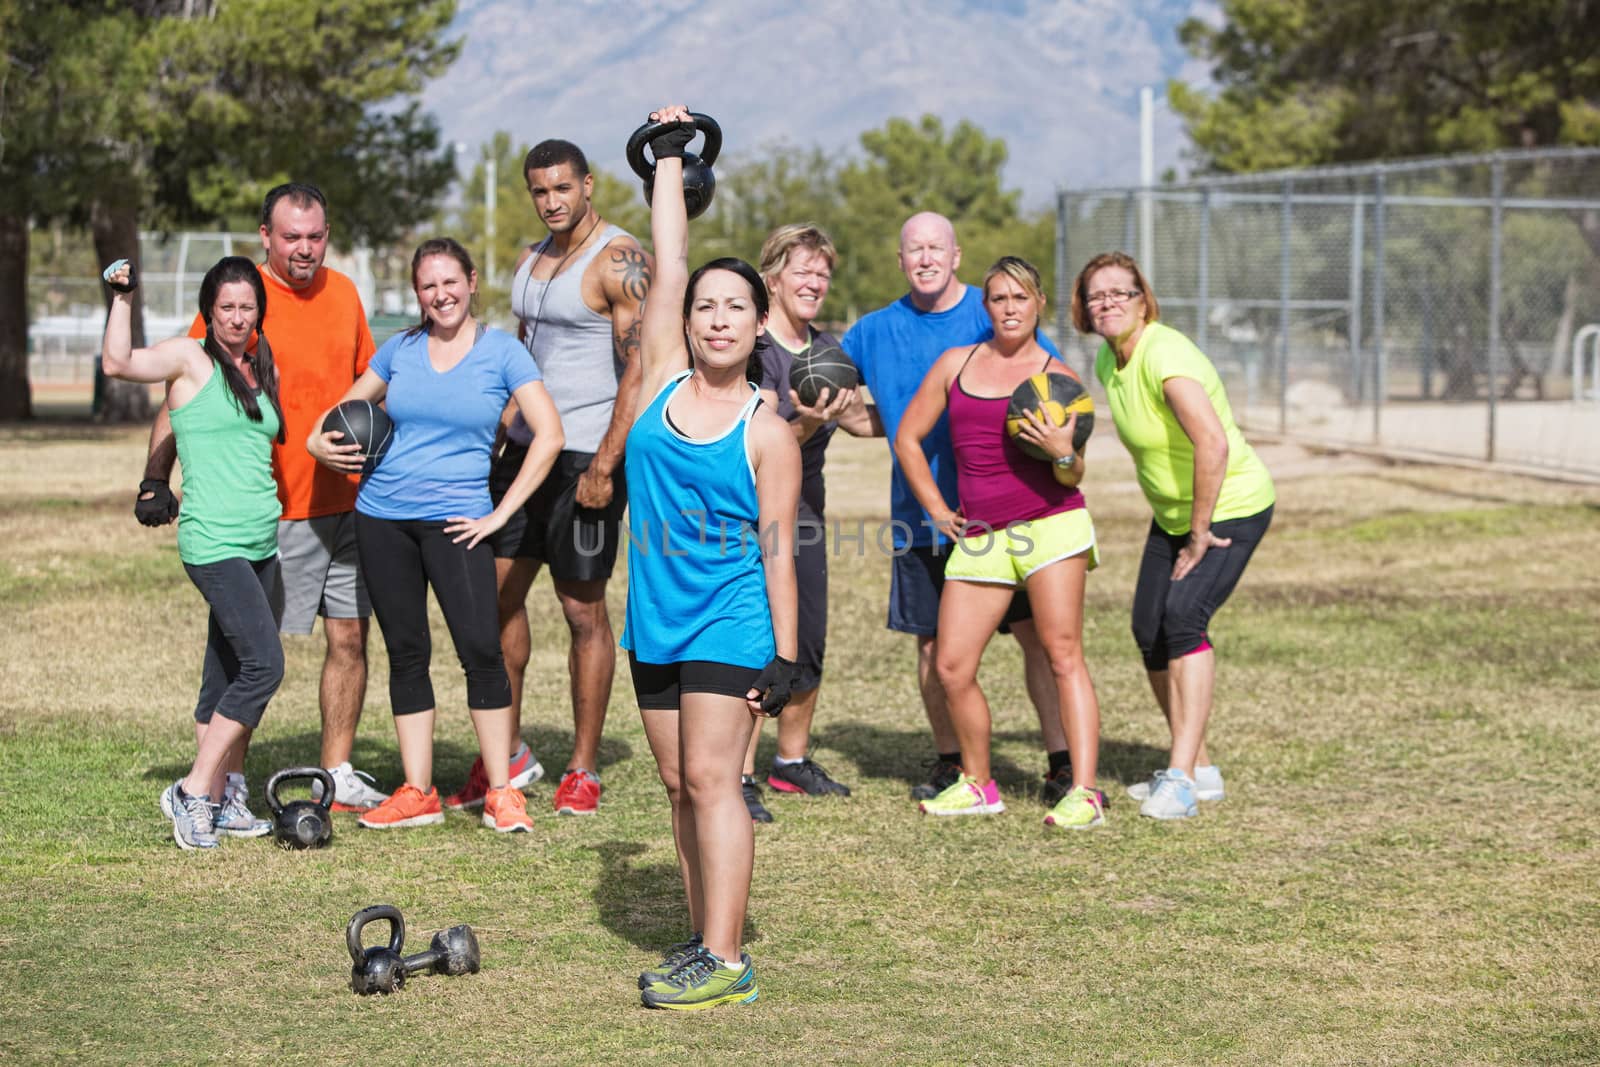 Happy woman lifting weights with group outdoors